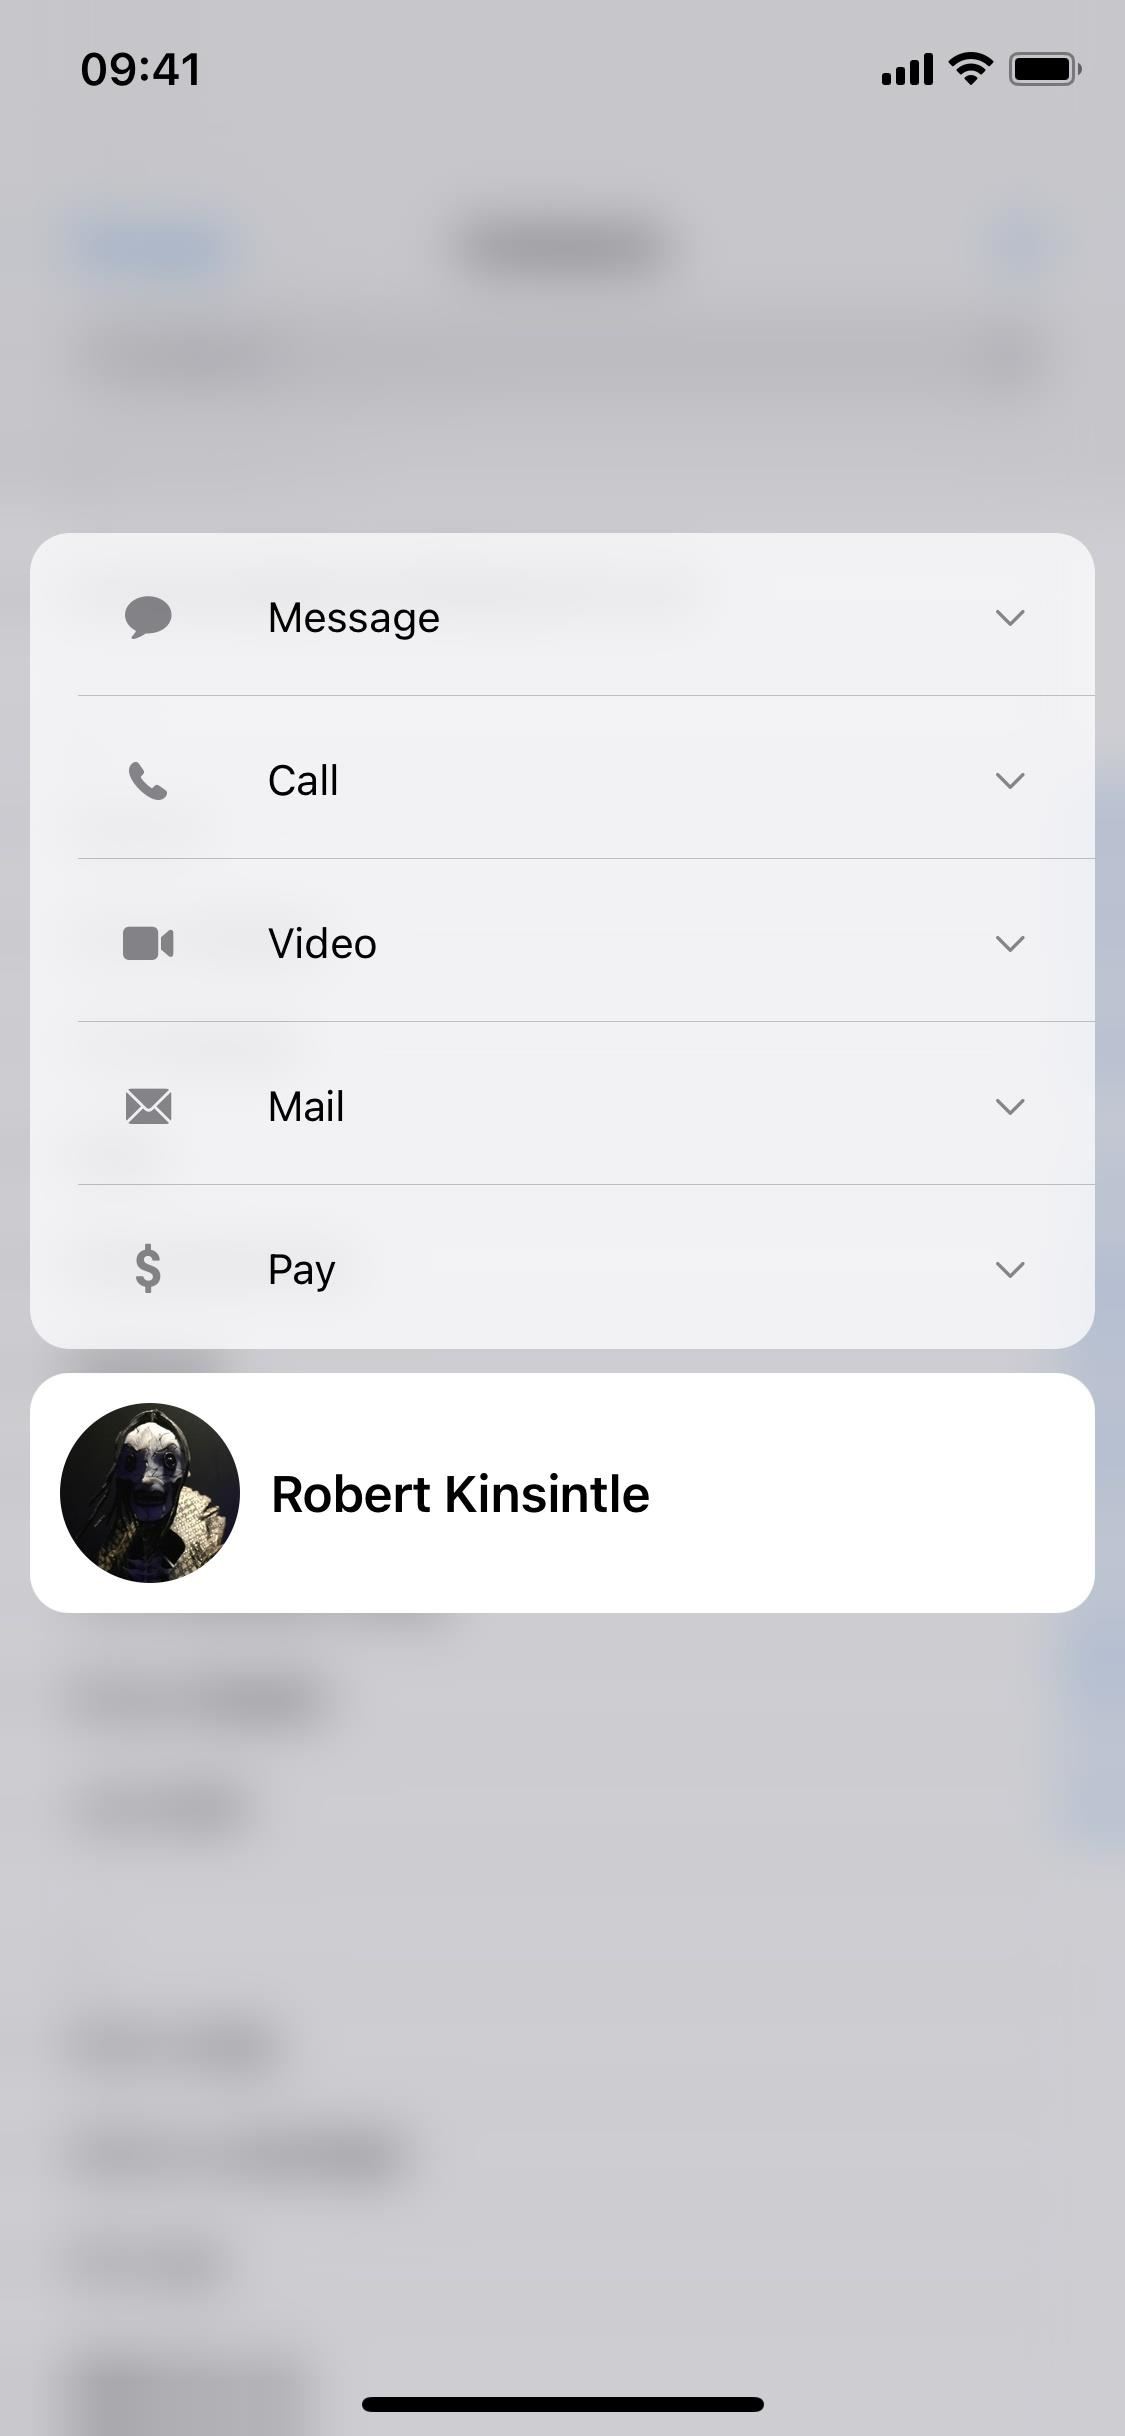 iPhone Contacts App Gets Its Biggest Update Ever